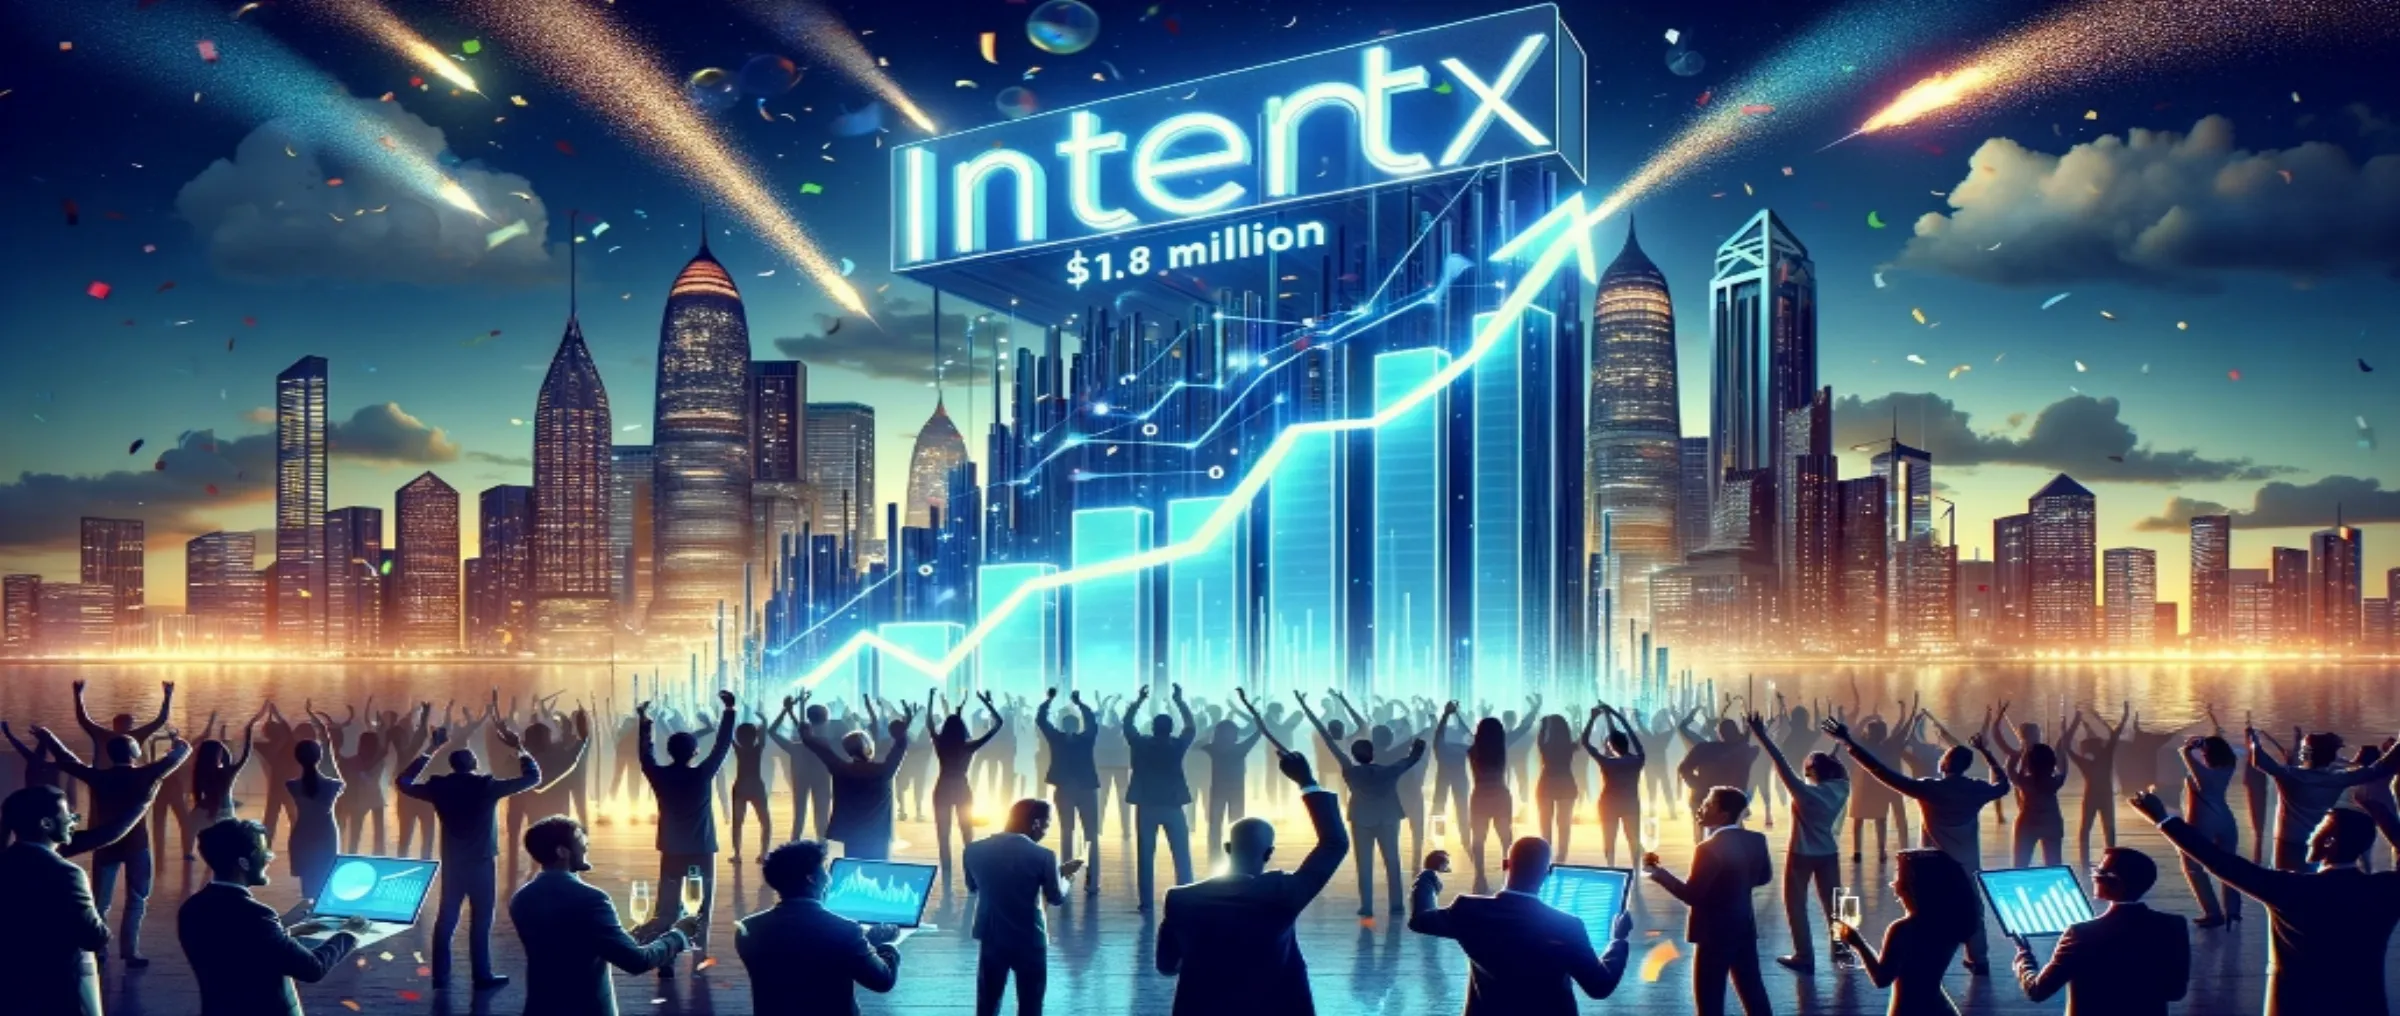 IntentX has attracted $1.8 million in investments